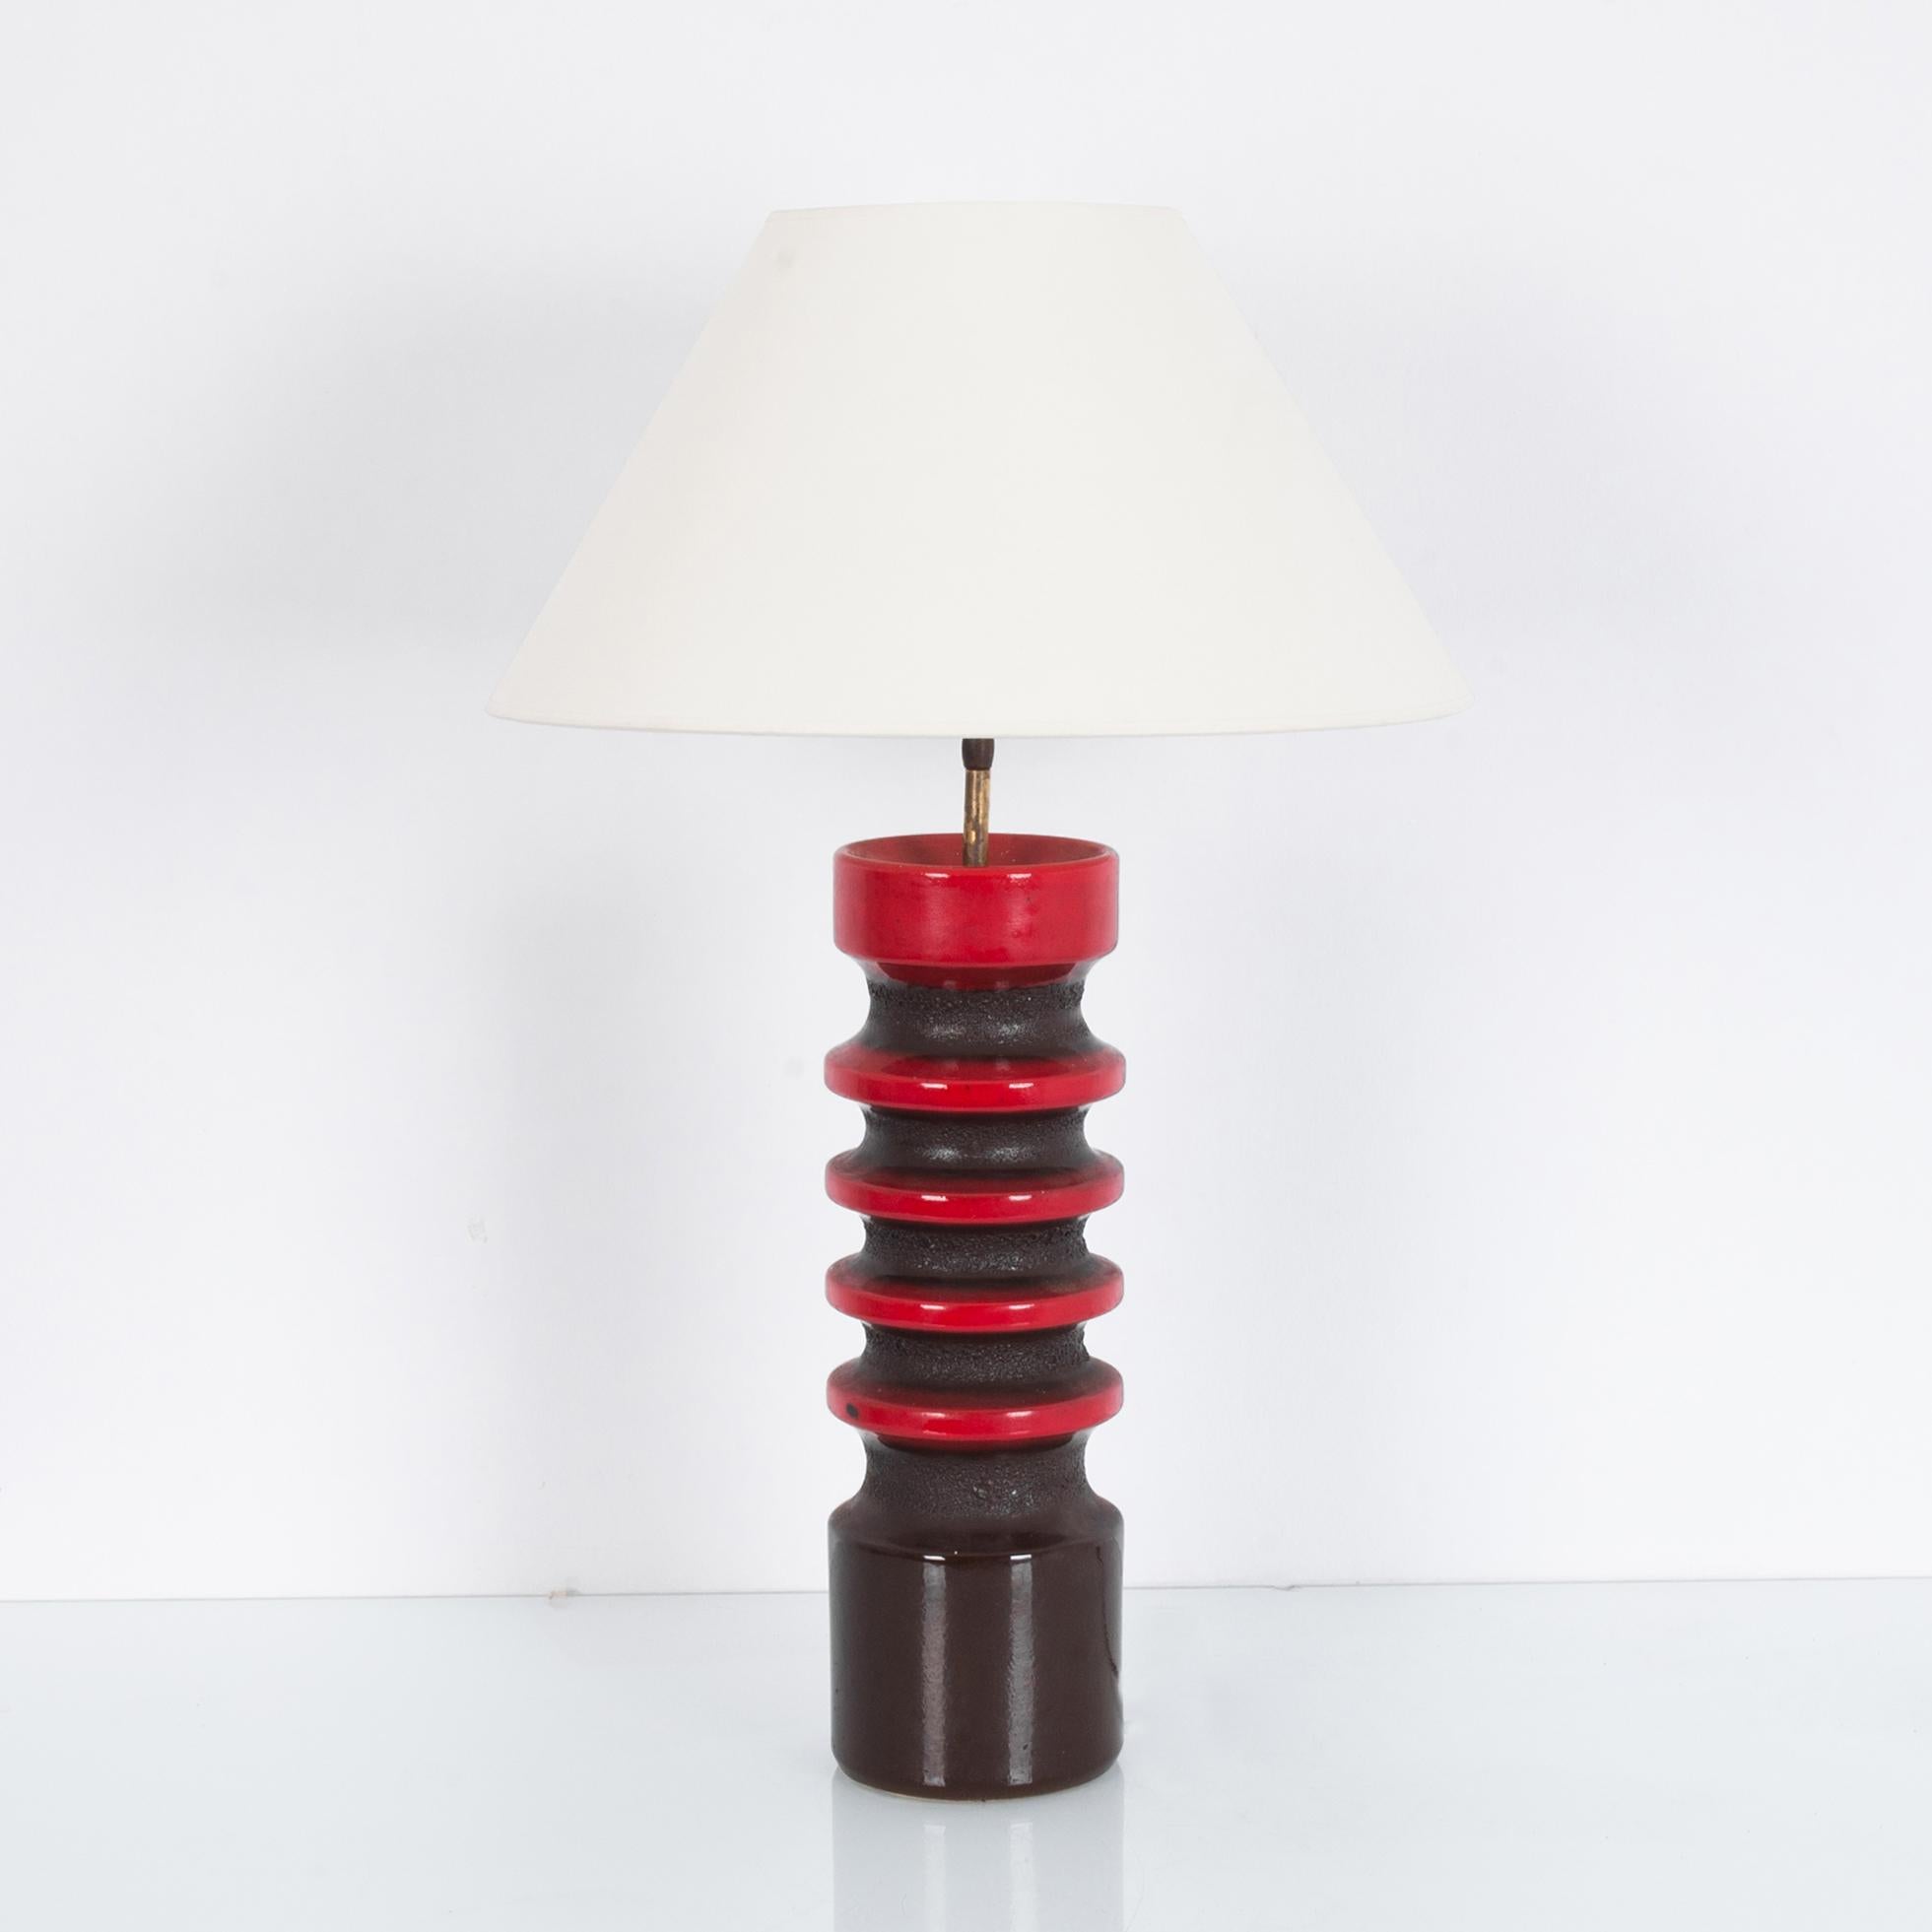 A ceramic table lamp from Germany, circa 1960. Punchy color and intriguing shape; a black and red ceramic column supports a simple lampshade in natural white. The ribbed silhouette is amplified by the cherry red enamel which alternates with a dark